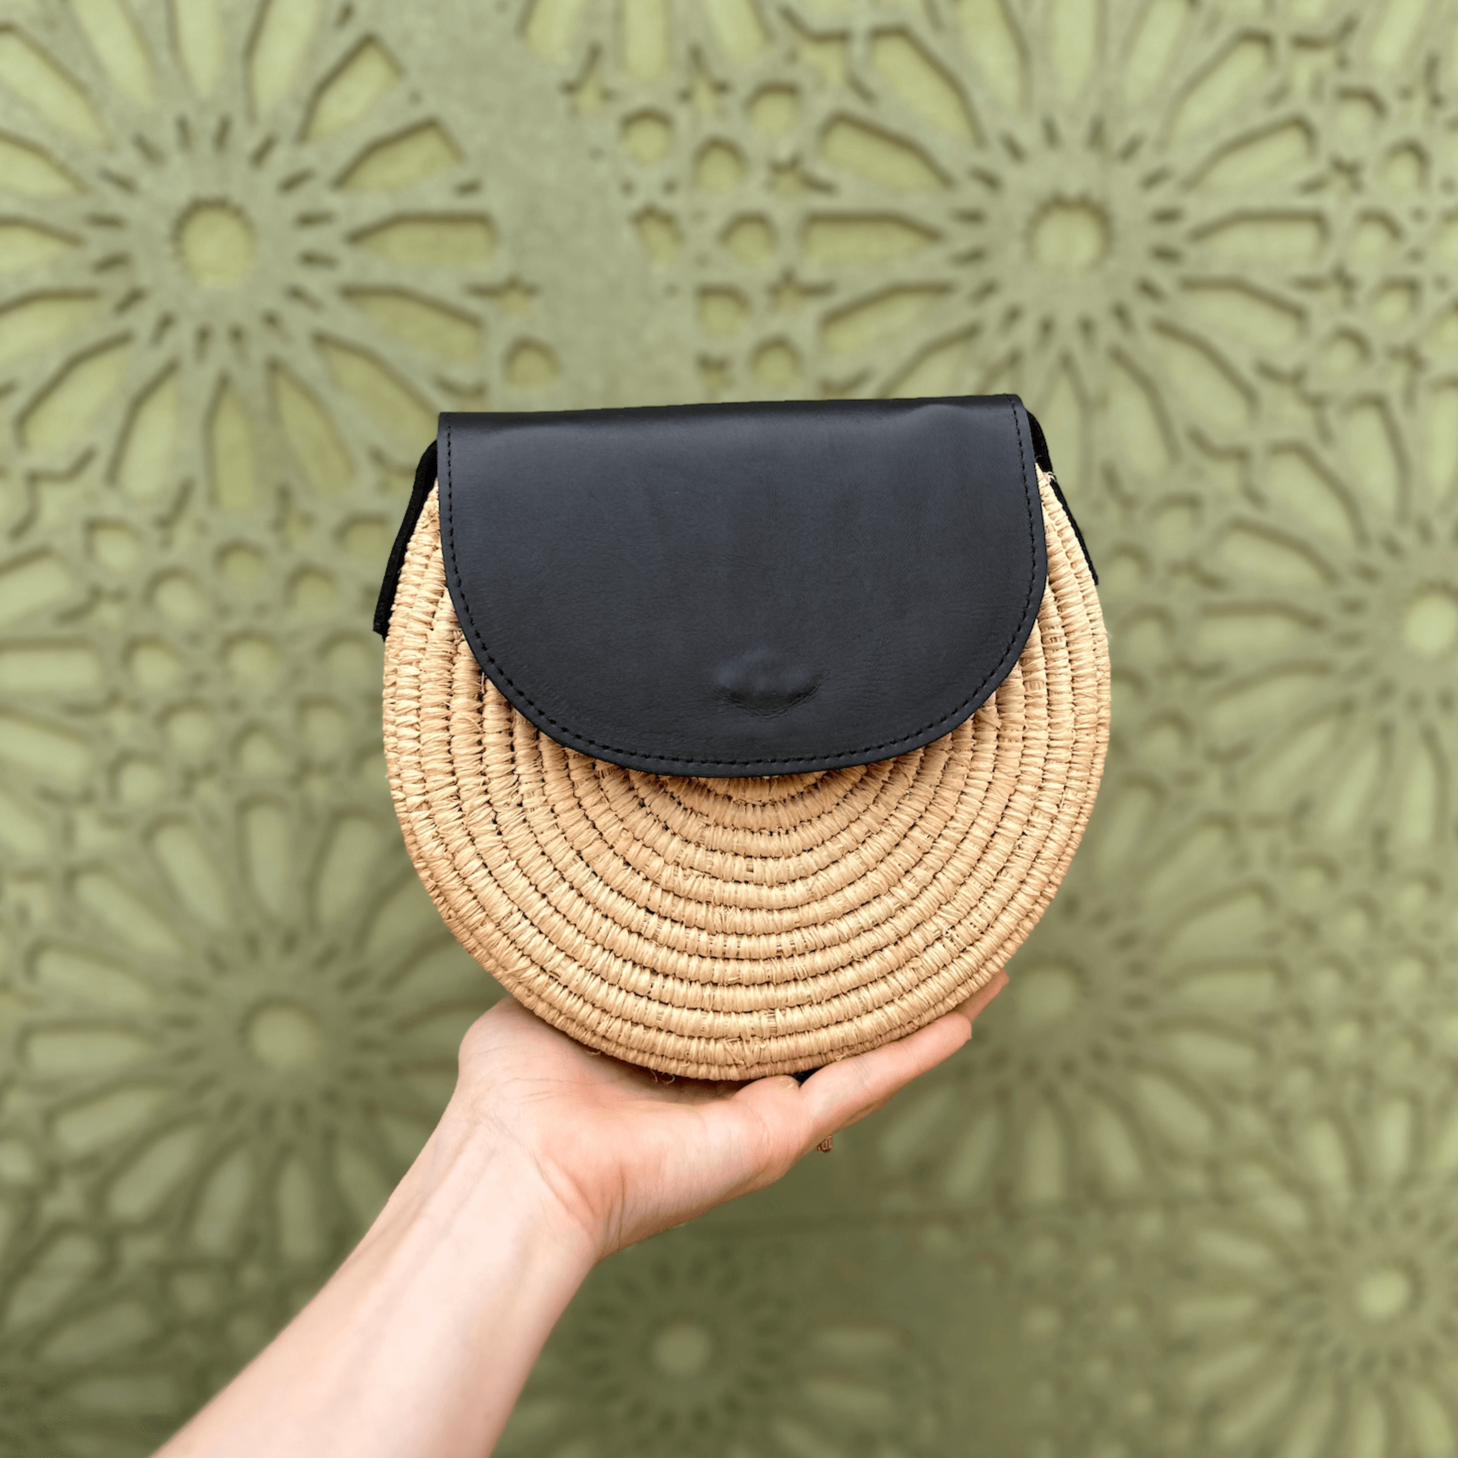 Black Smooth Leather and Raffia Round Bag